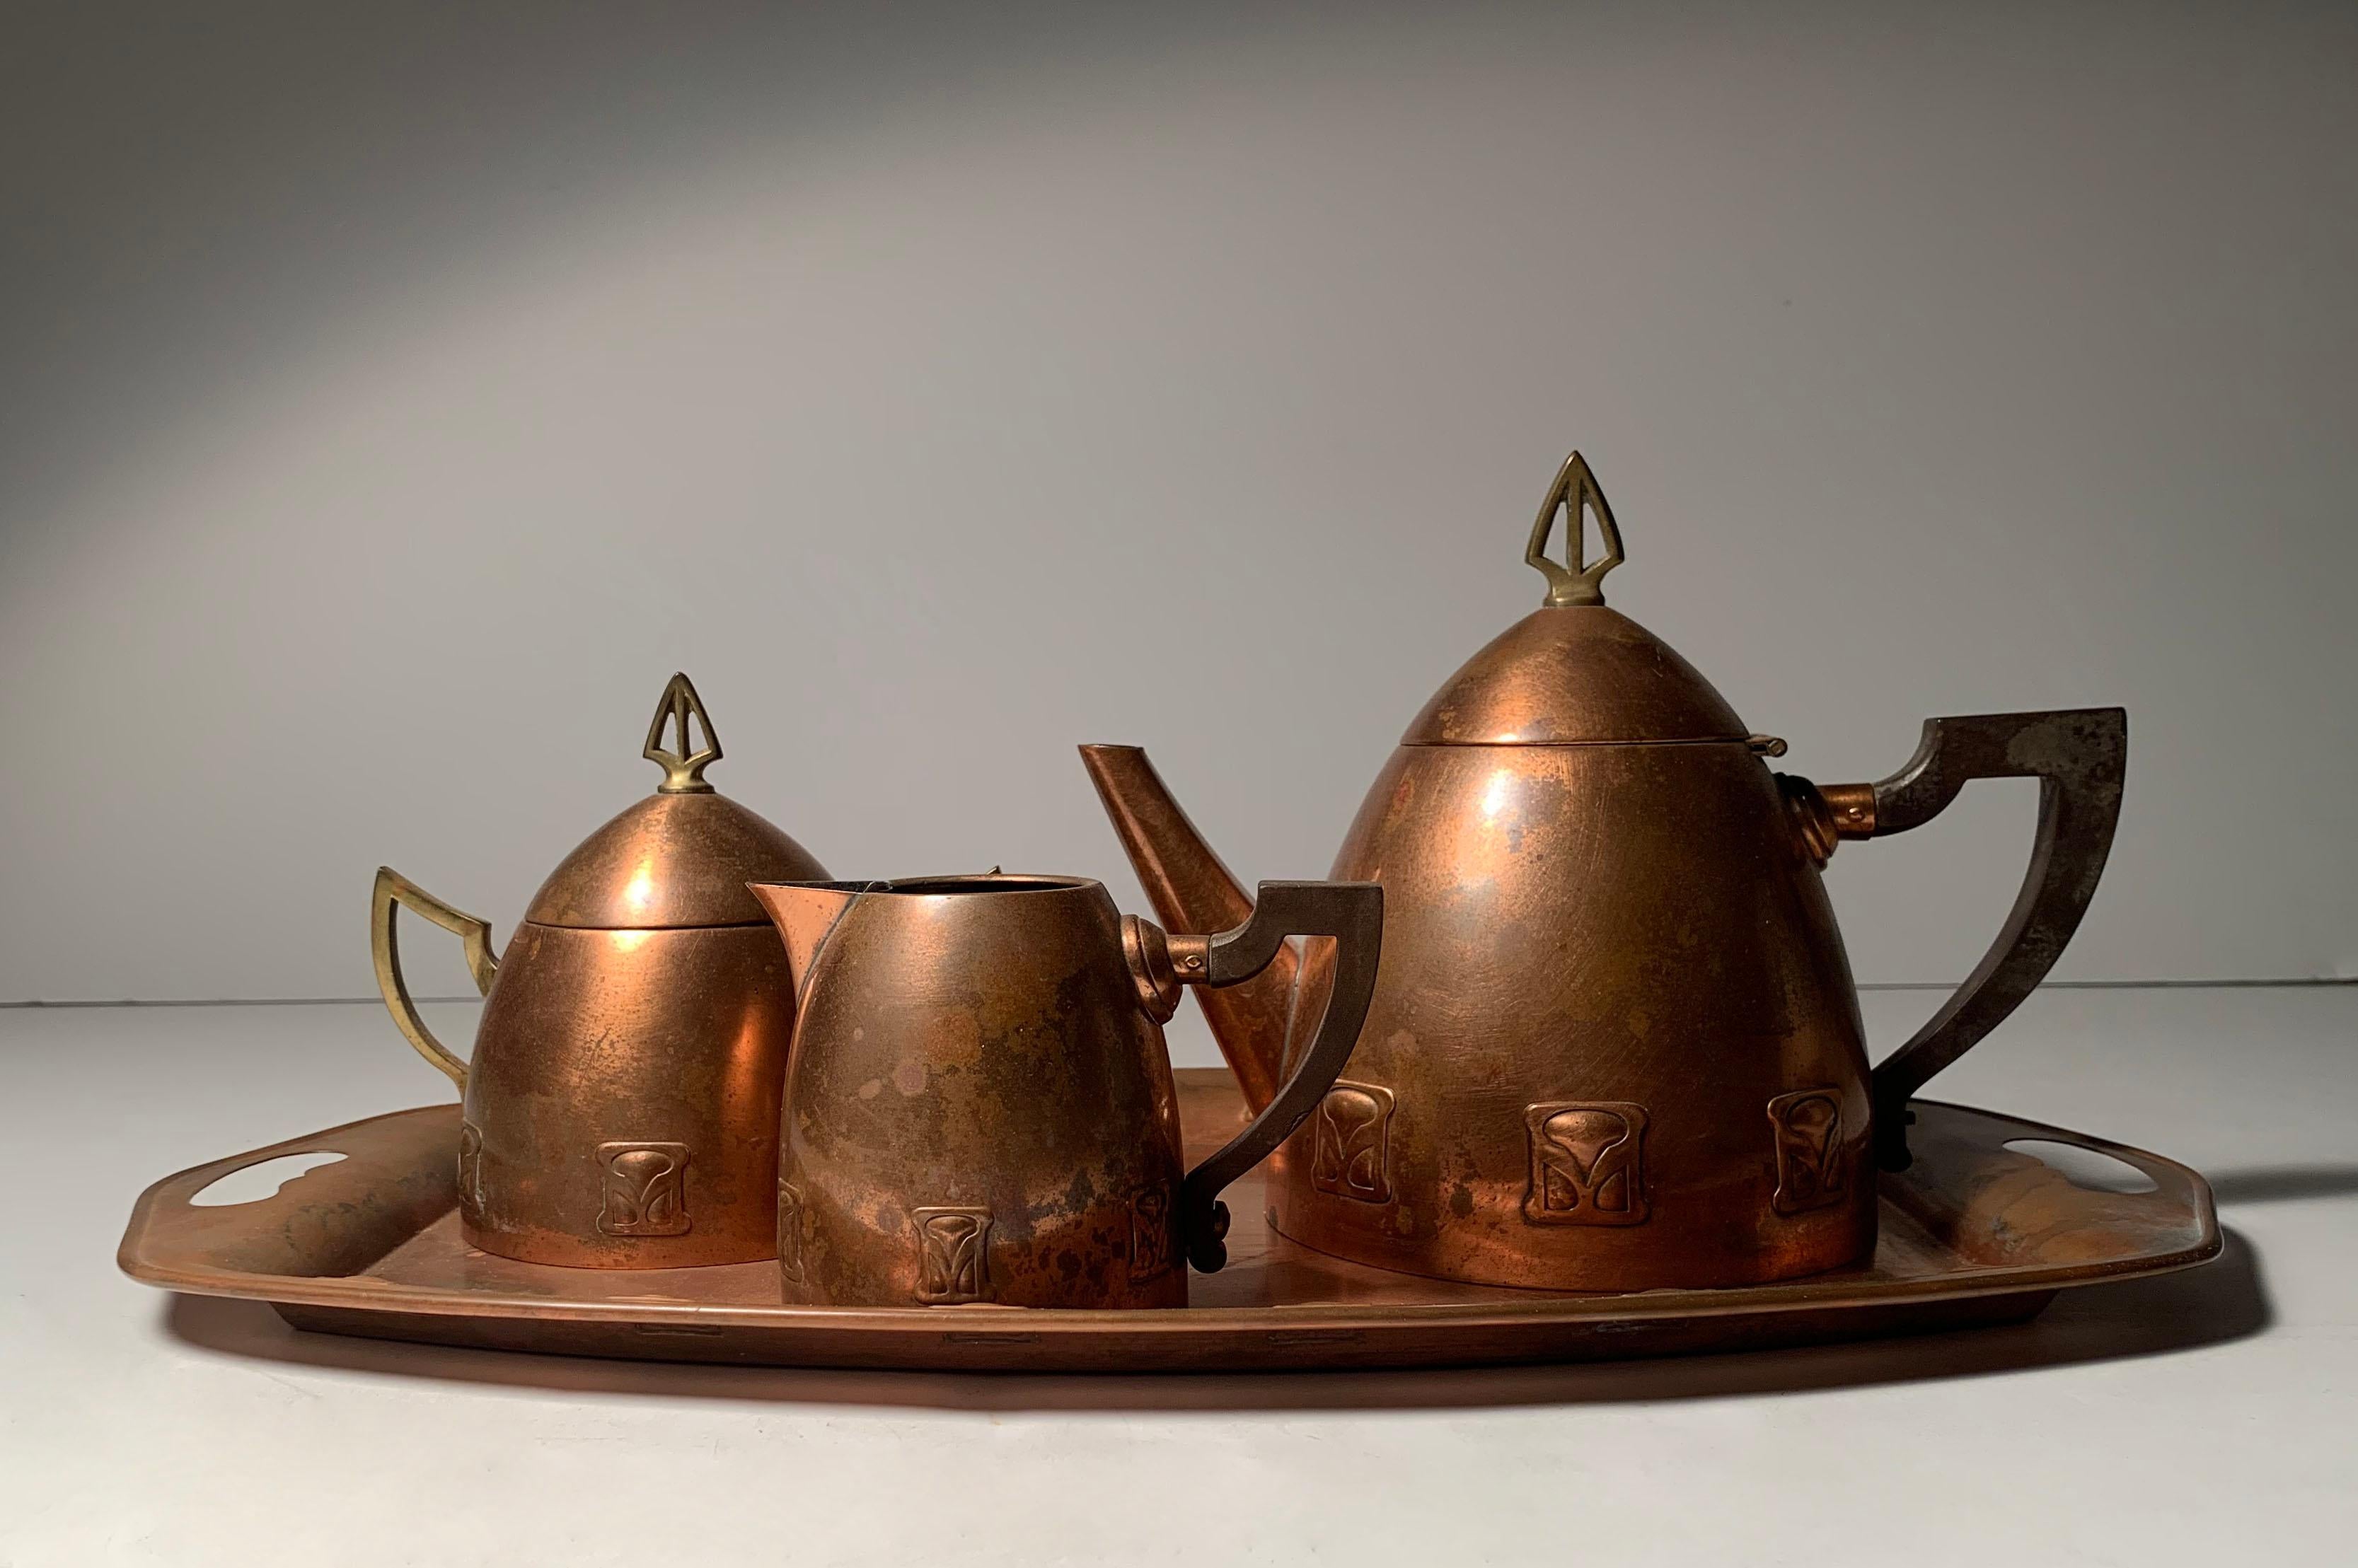 Jugendstil copper and brass teapot set by Atelier Mayer for WMF, Germany, 1905-1910

Dims are of teapot alone.